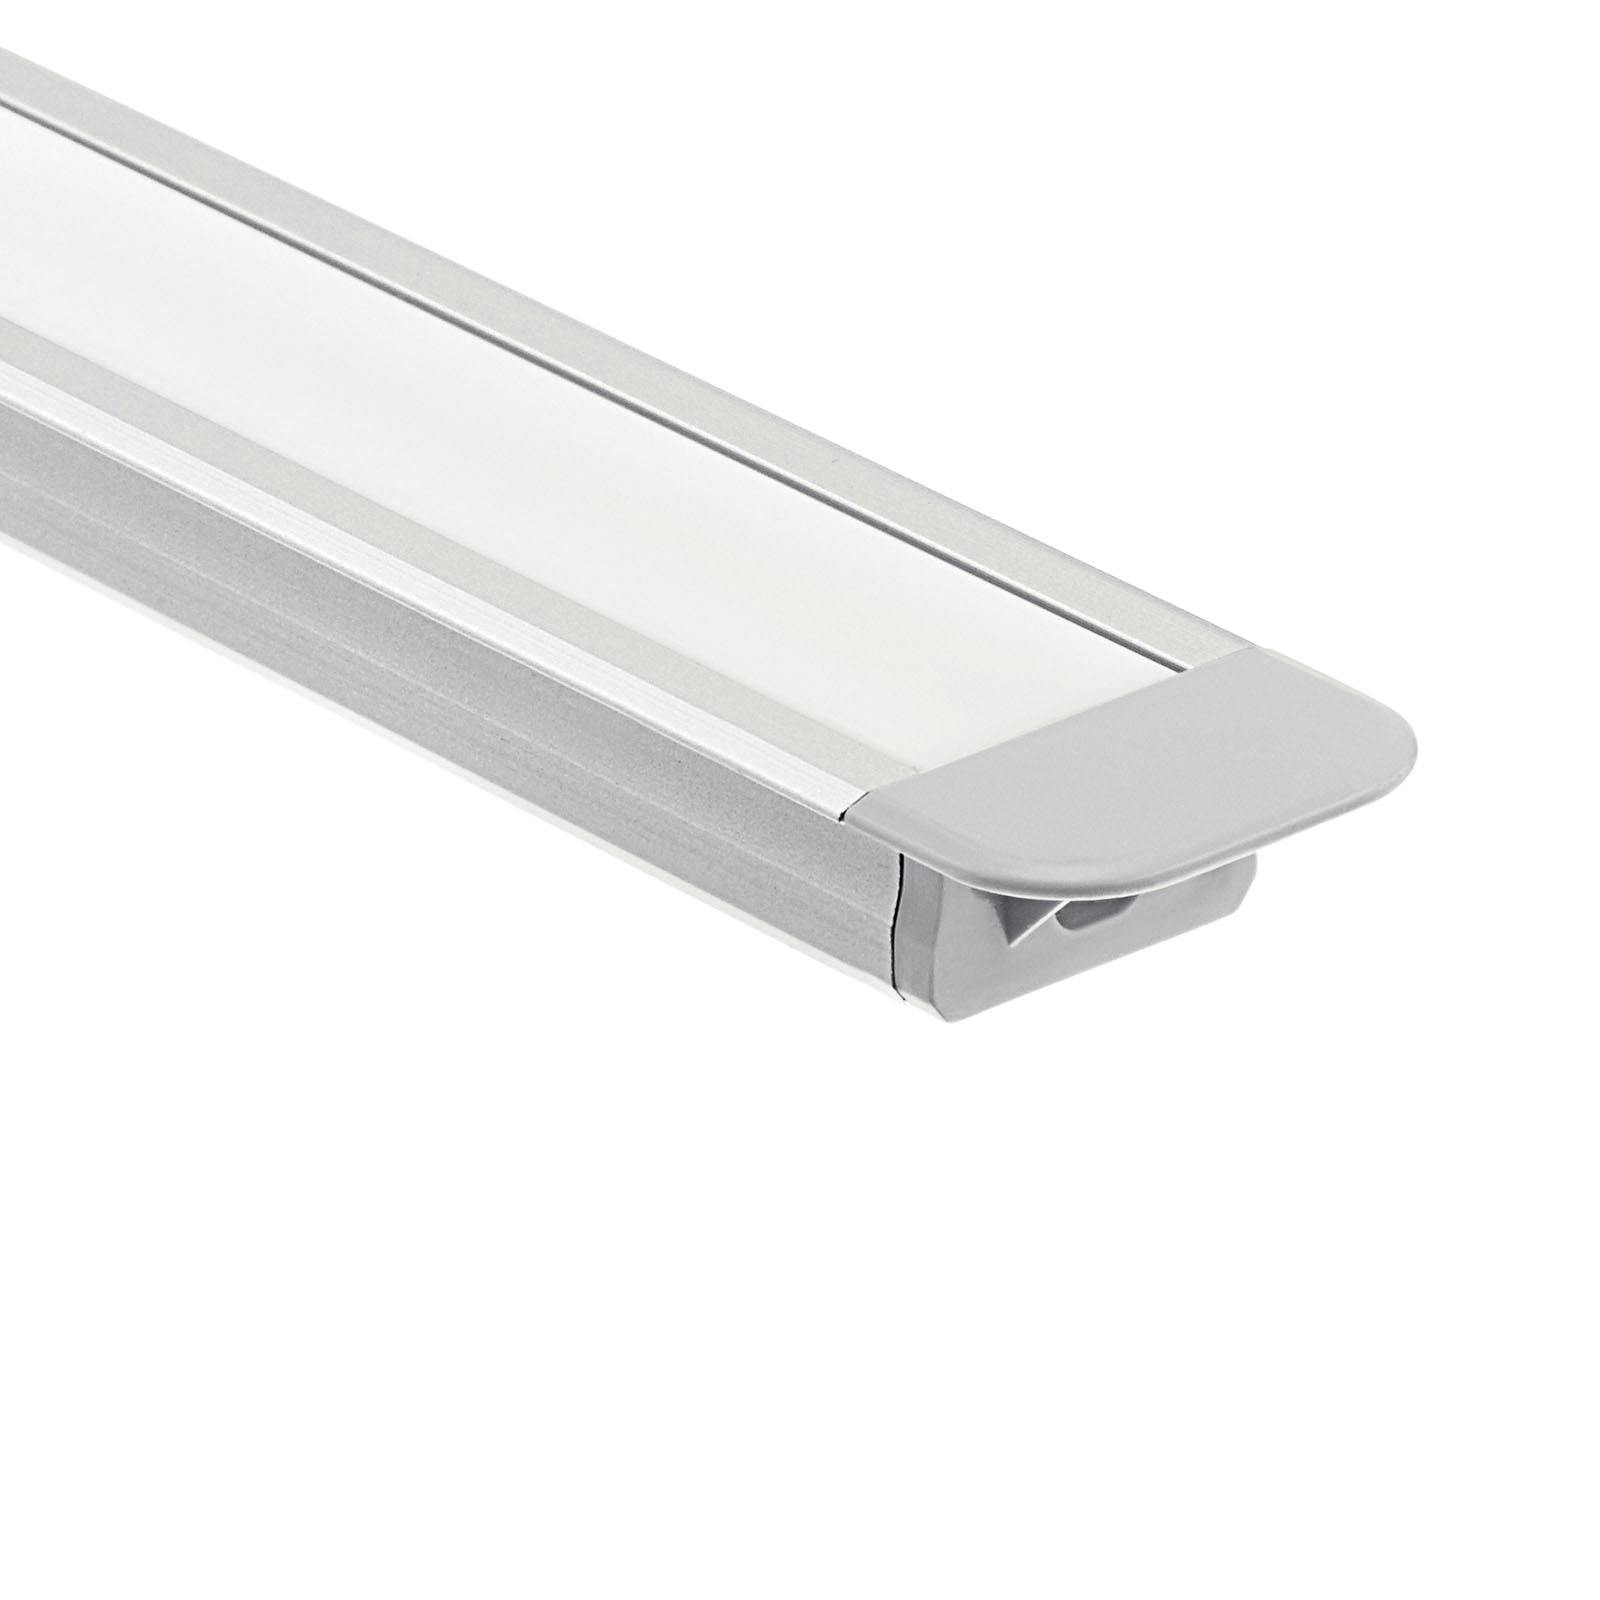 8' Standard Depth Recessed Channel Silver on a white background